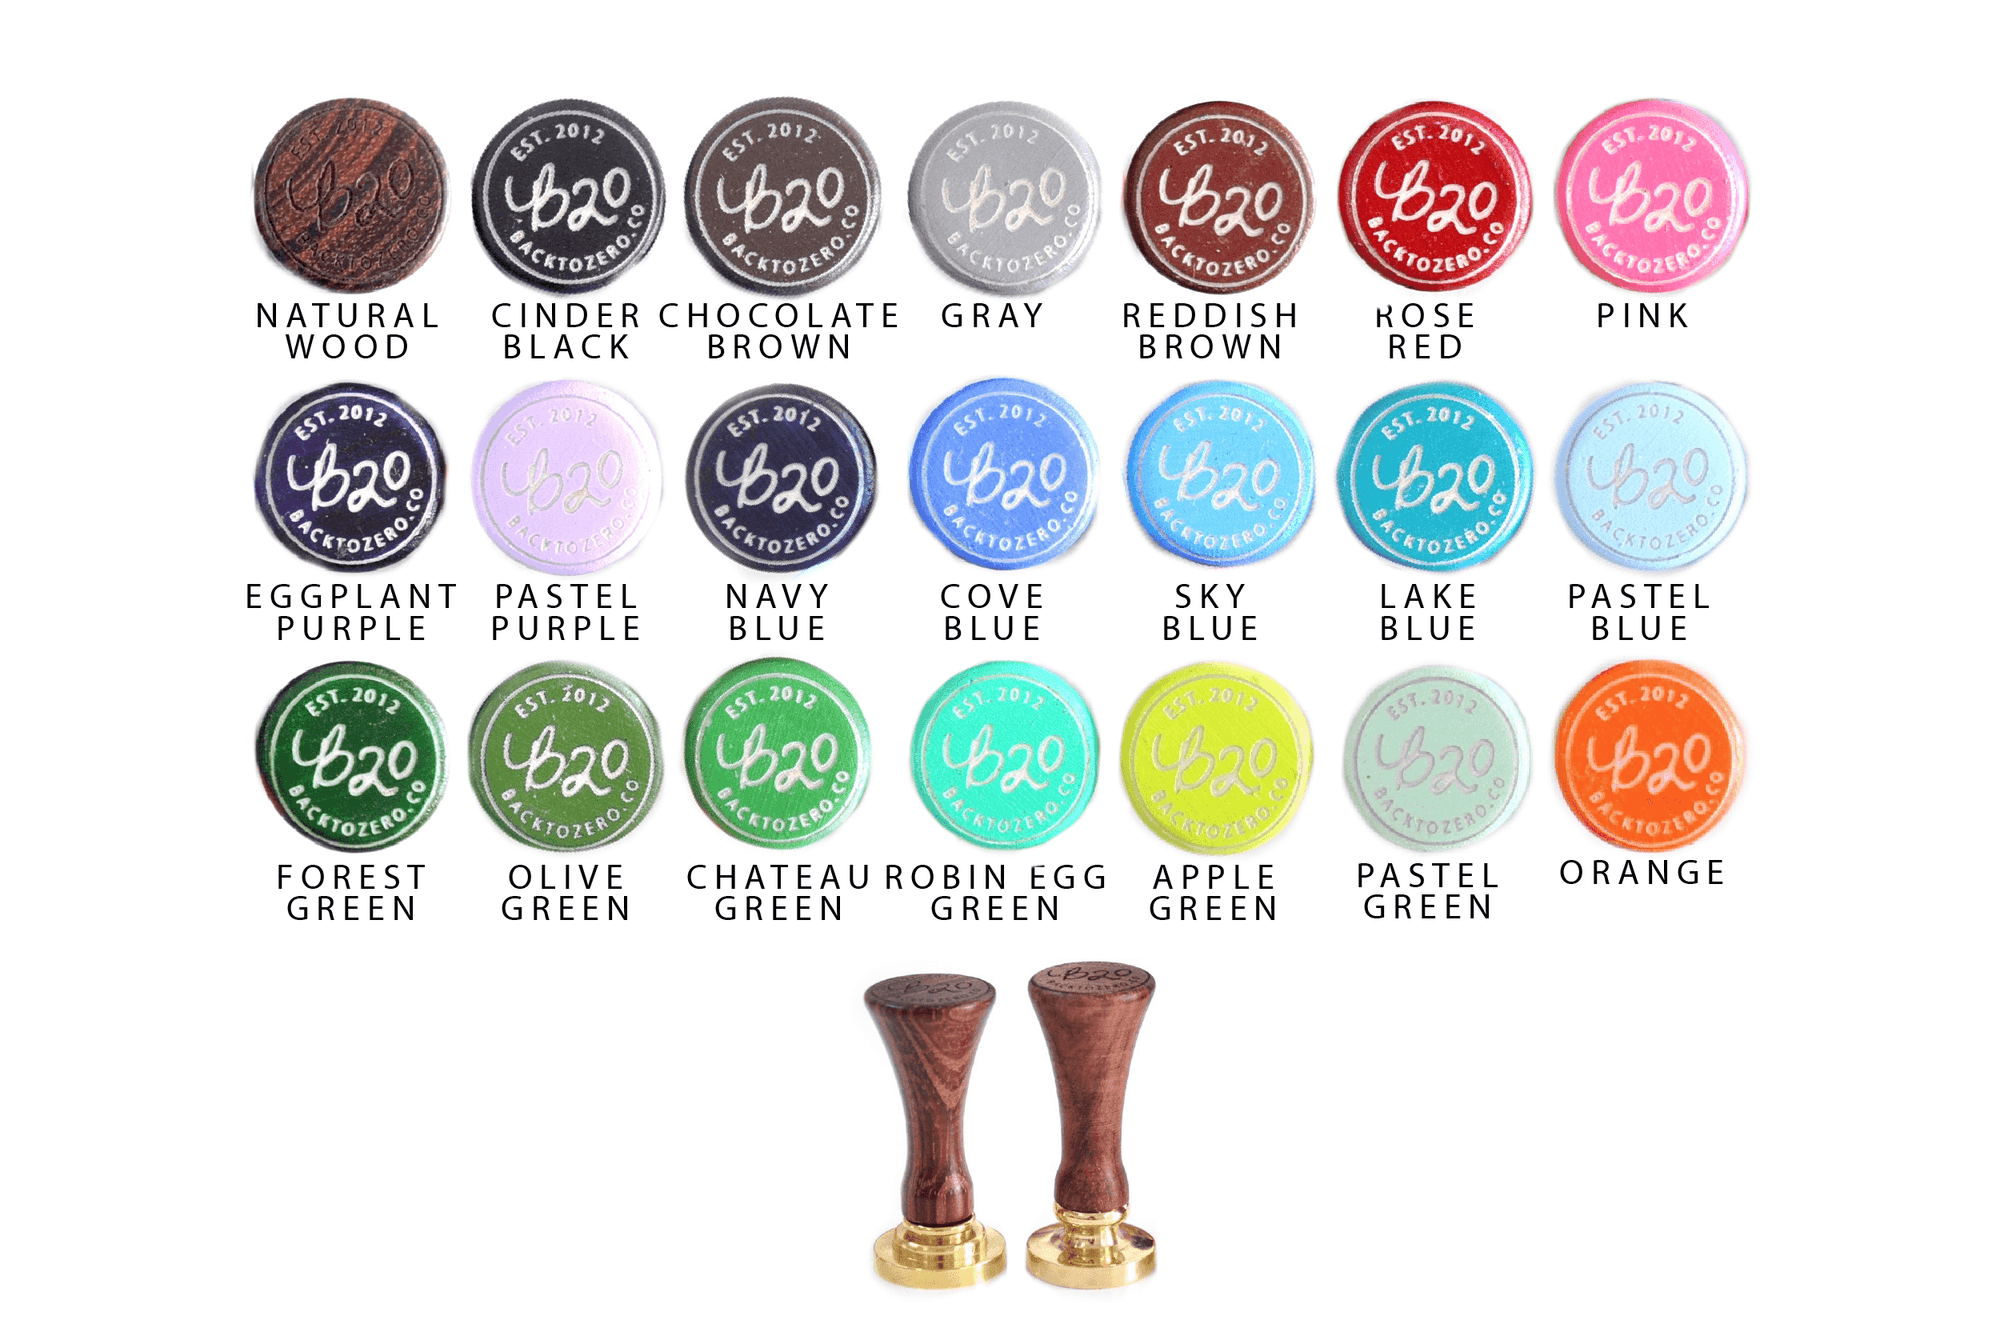 Script Initial Wax Seal Stamp - Backtozero B20 - 1 initial, 1initial, Calligraphy, Champagne Gold, Letter, Monogram, One initial, Personalized, Sealing Wax, Signature, signaturehandle